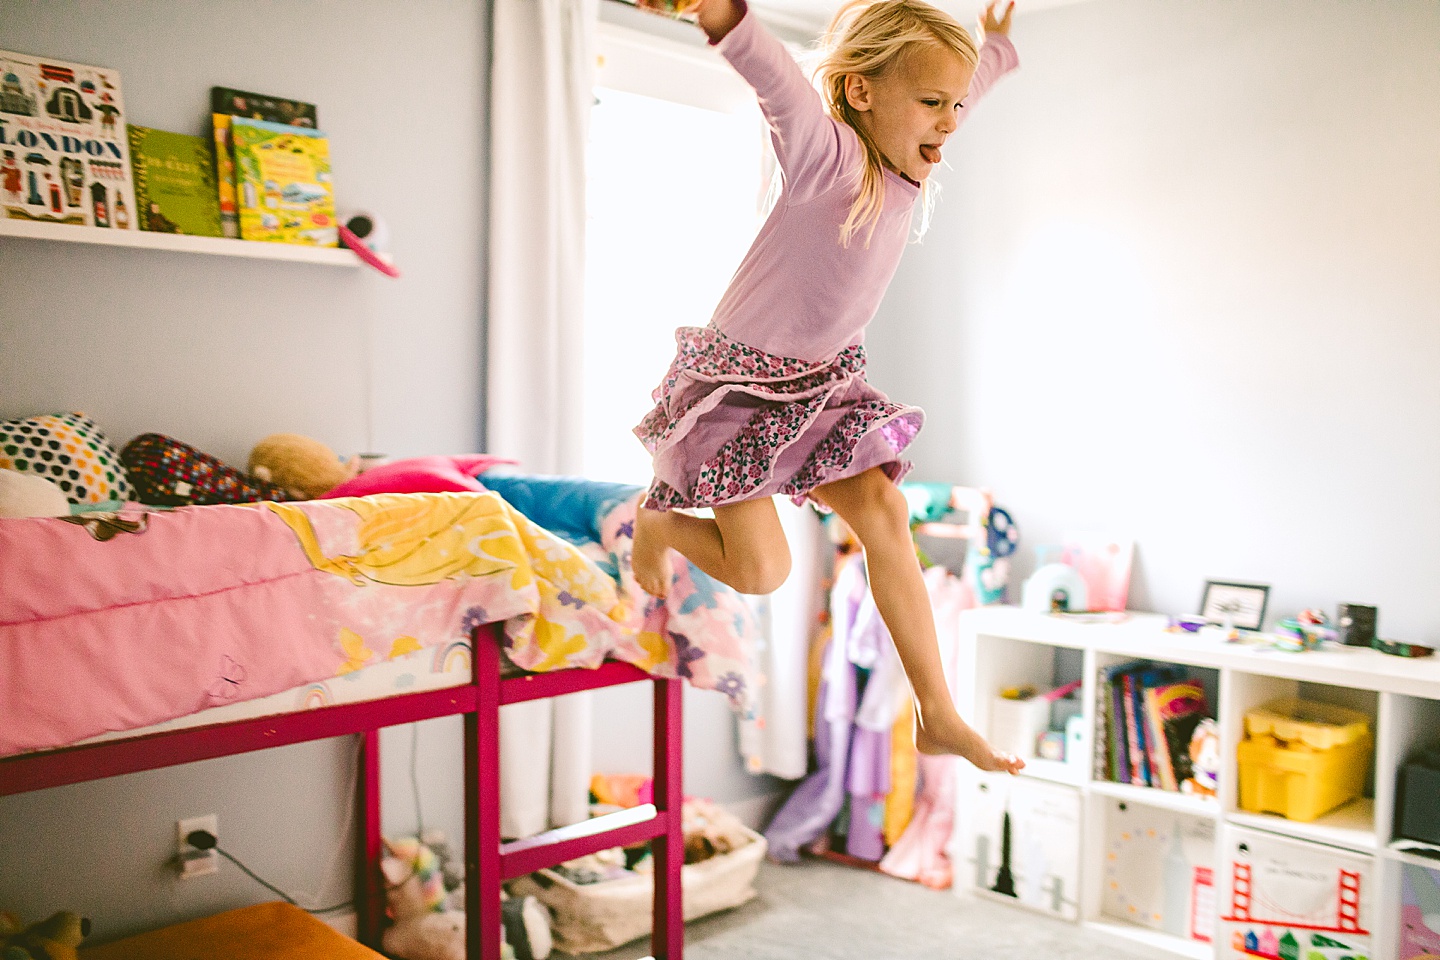 Girl jumping off her bunk bed